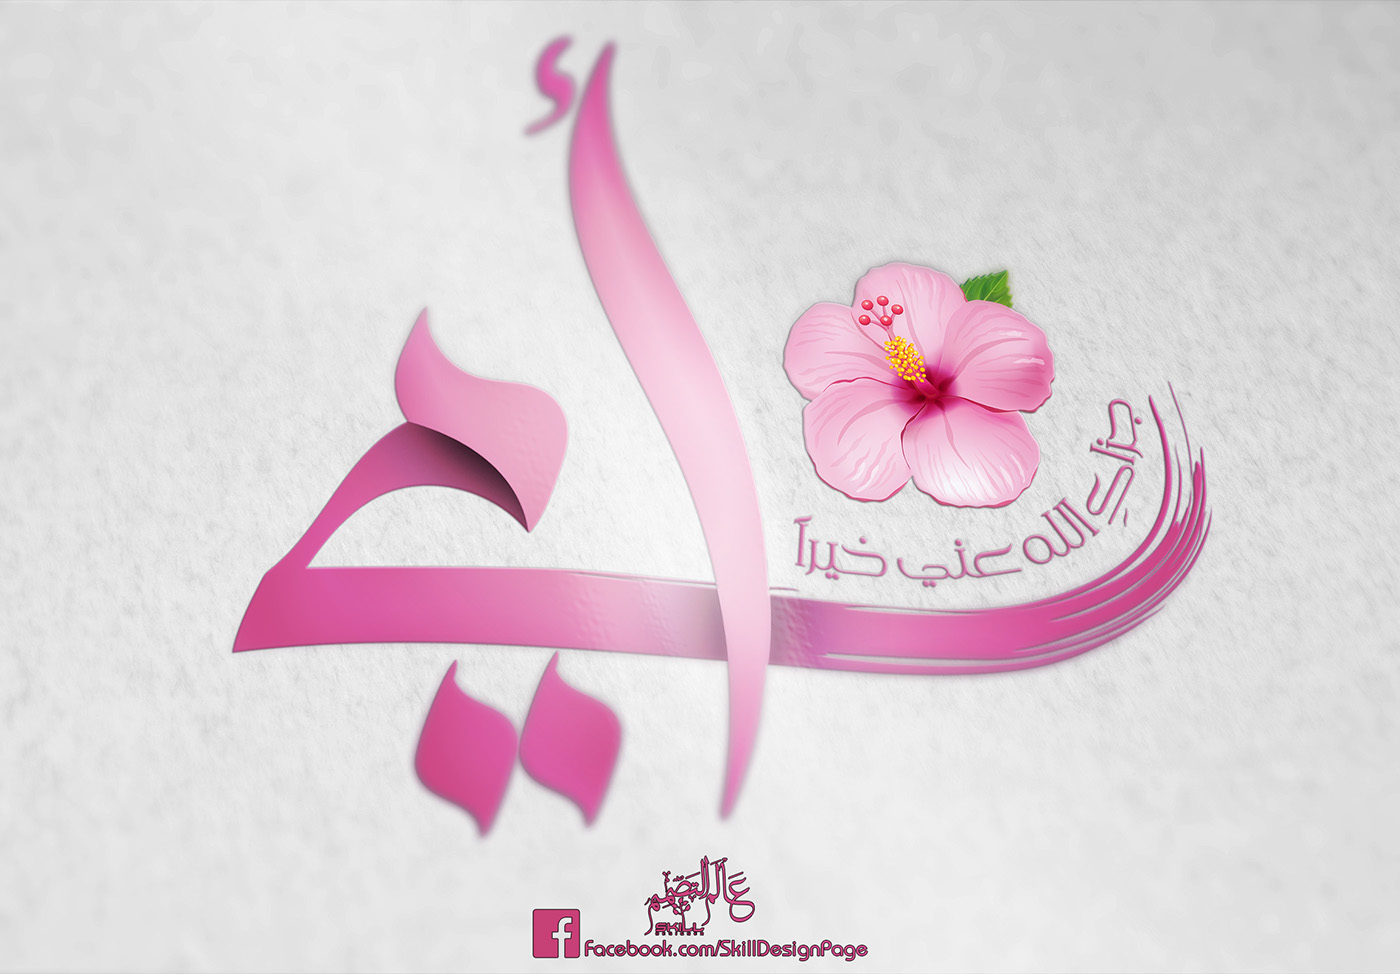 Calligraphy   mother Mother'sday   Omy   typography   umy امى